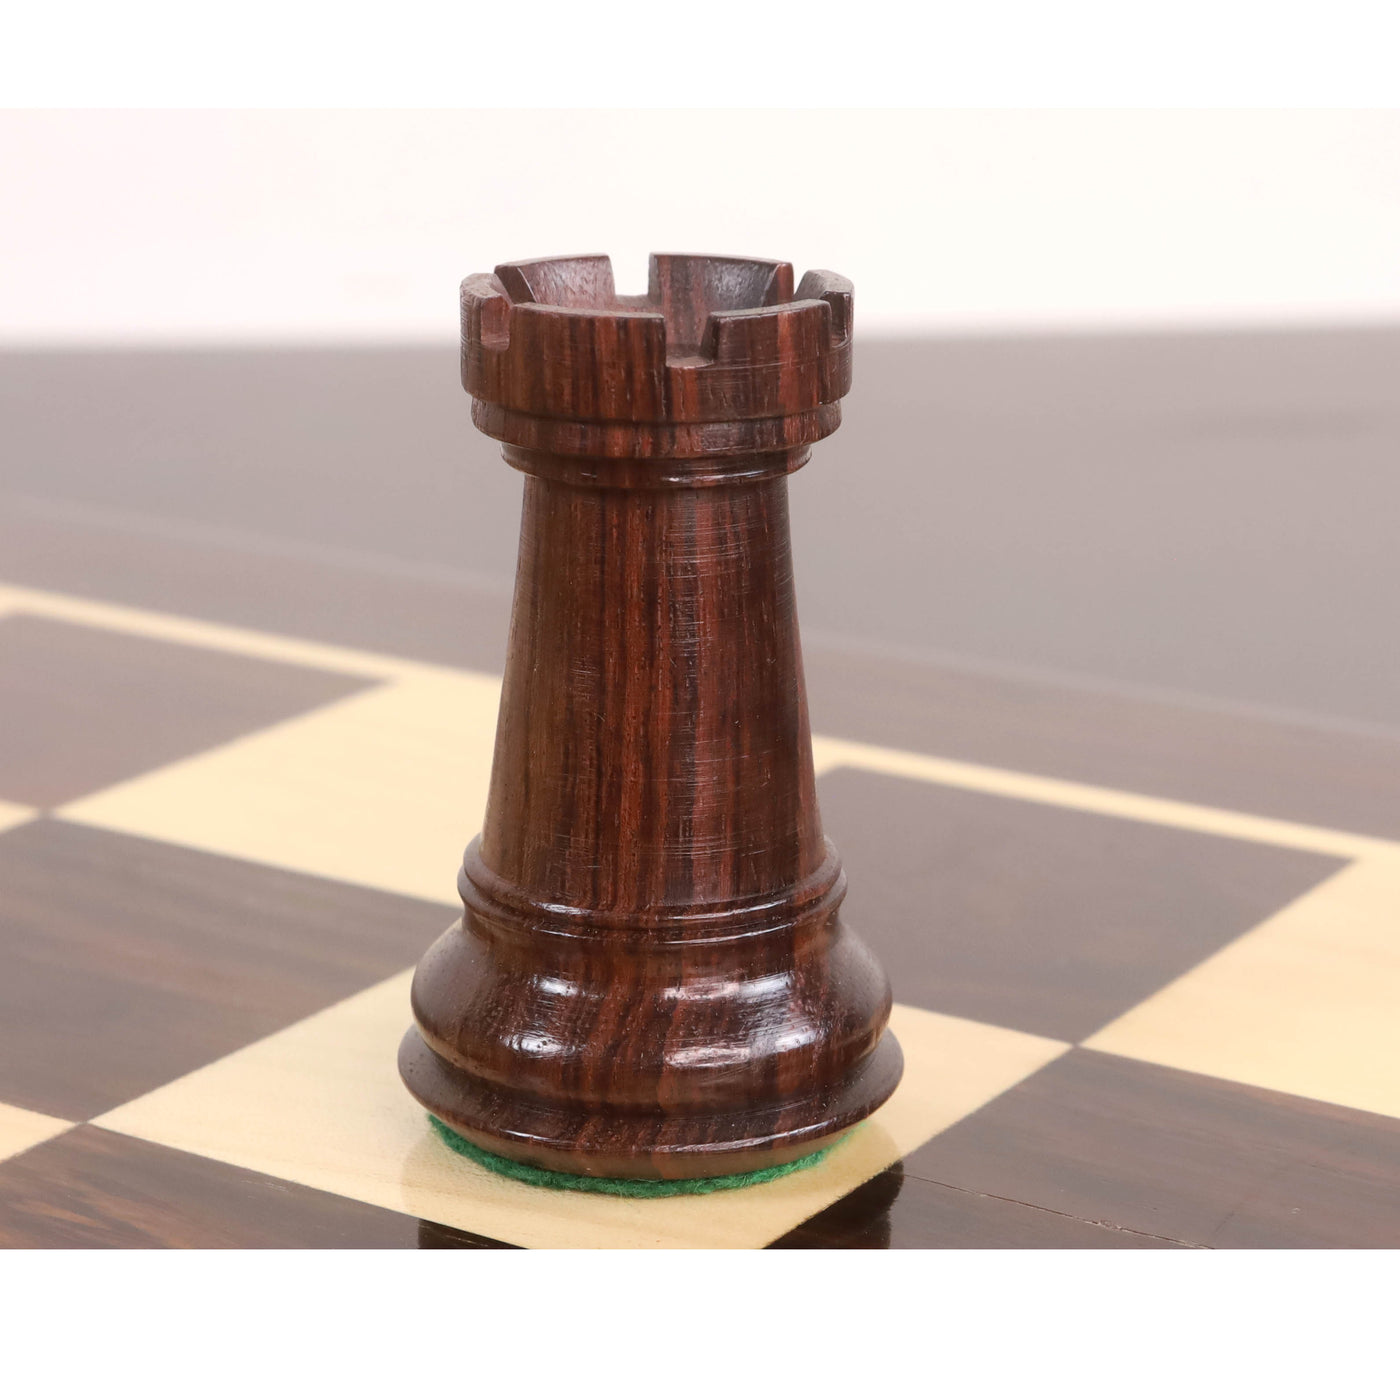 4" Sleek Staunton Luxury Chess Pieces Only Set - Triple Weighted Rose Wood